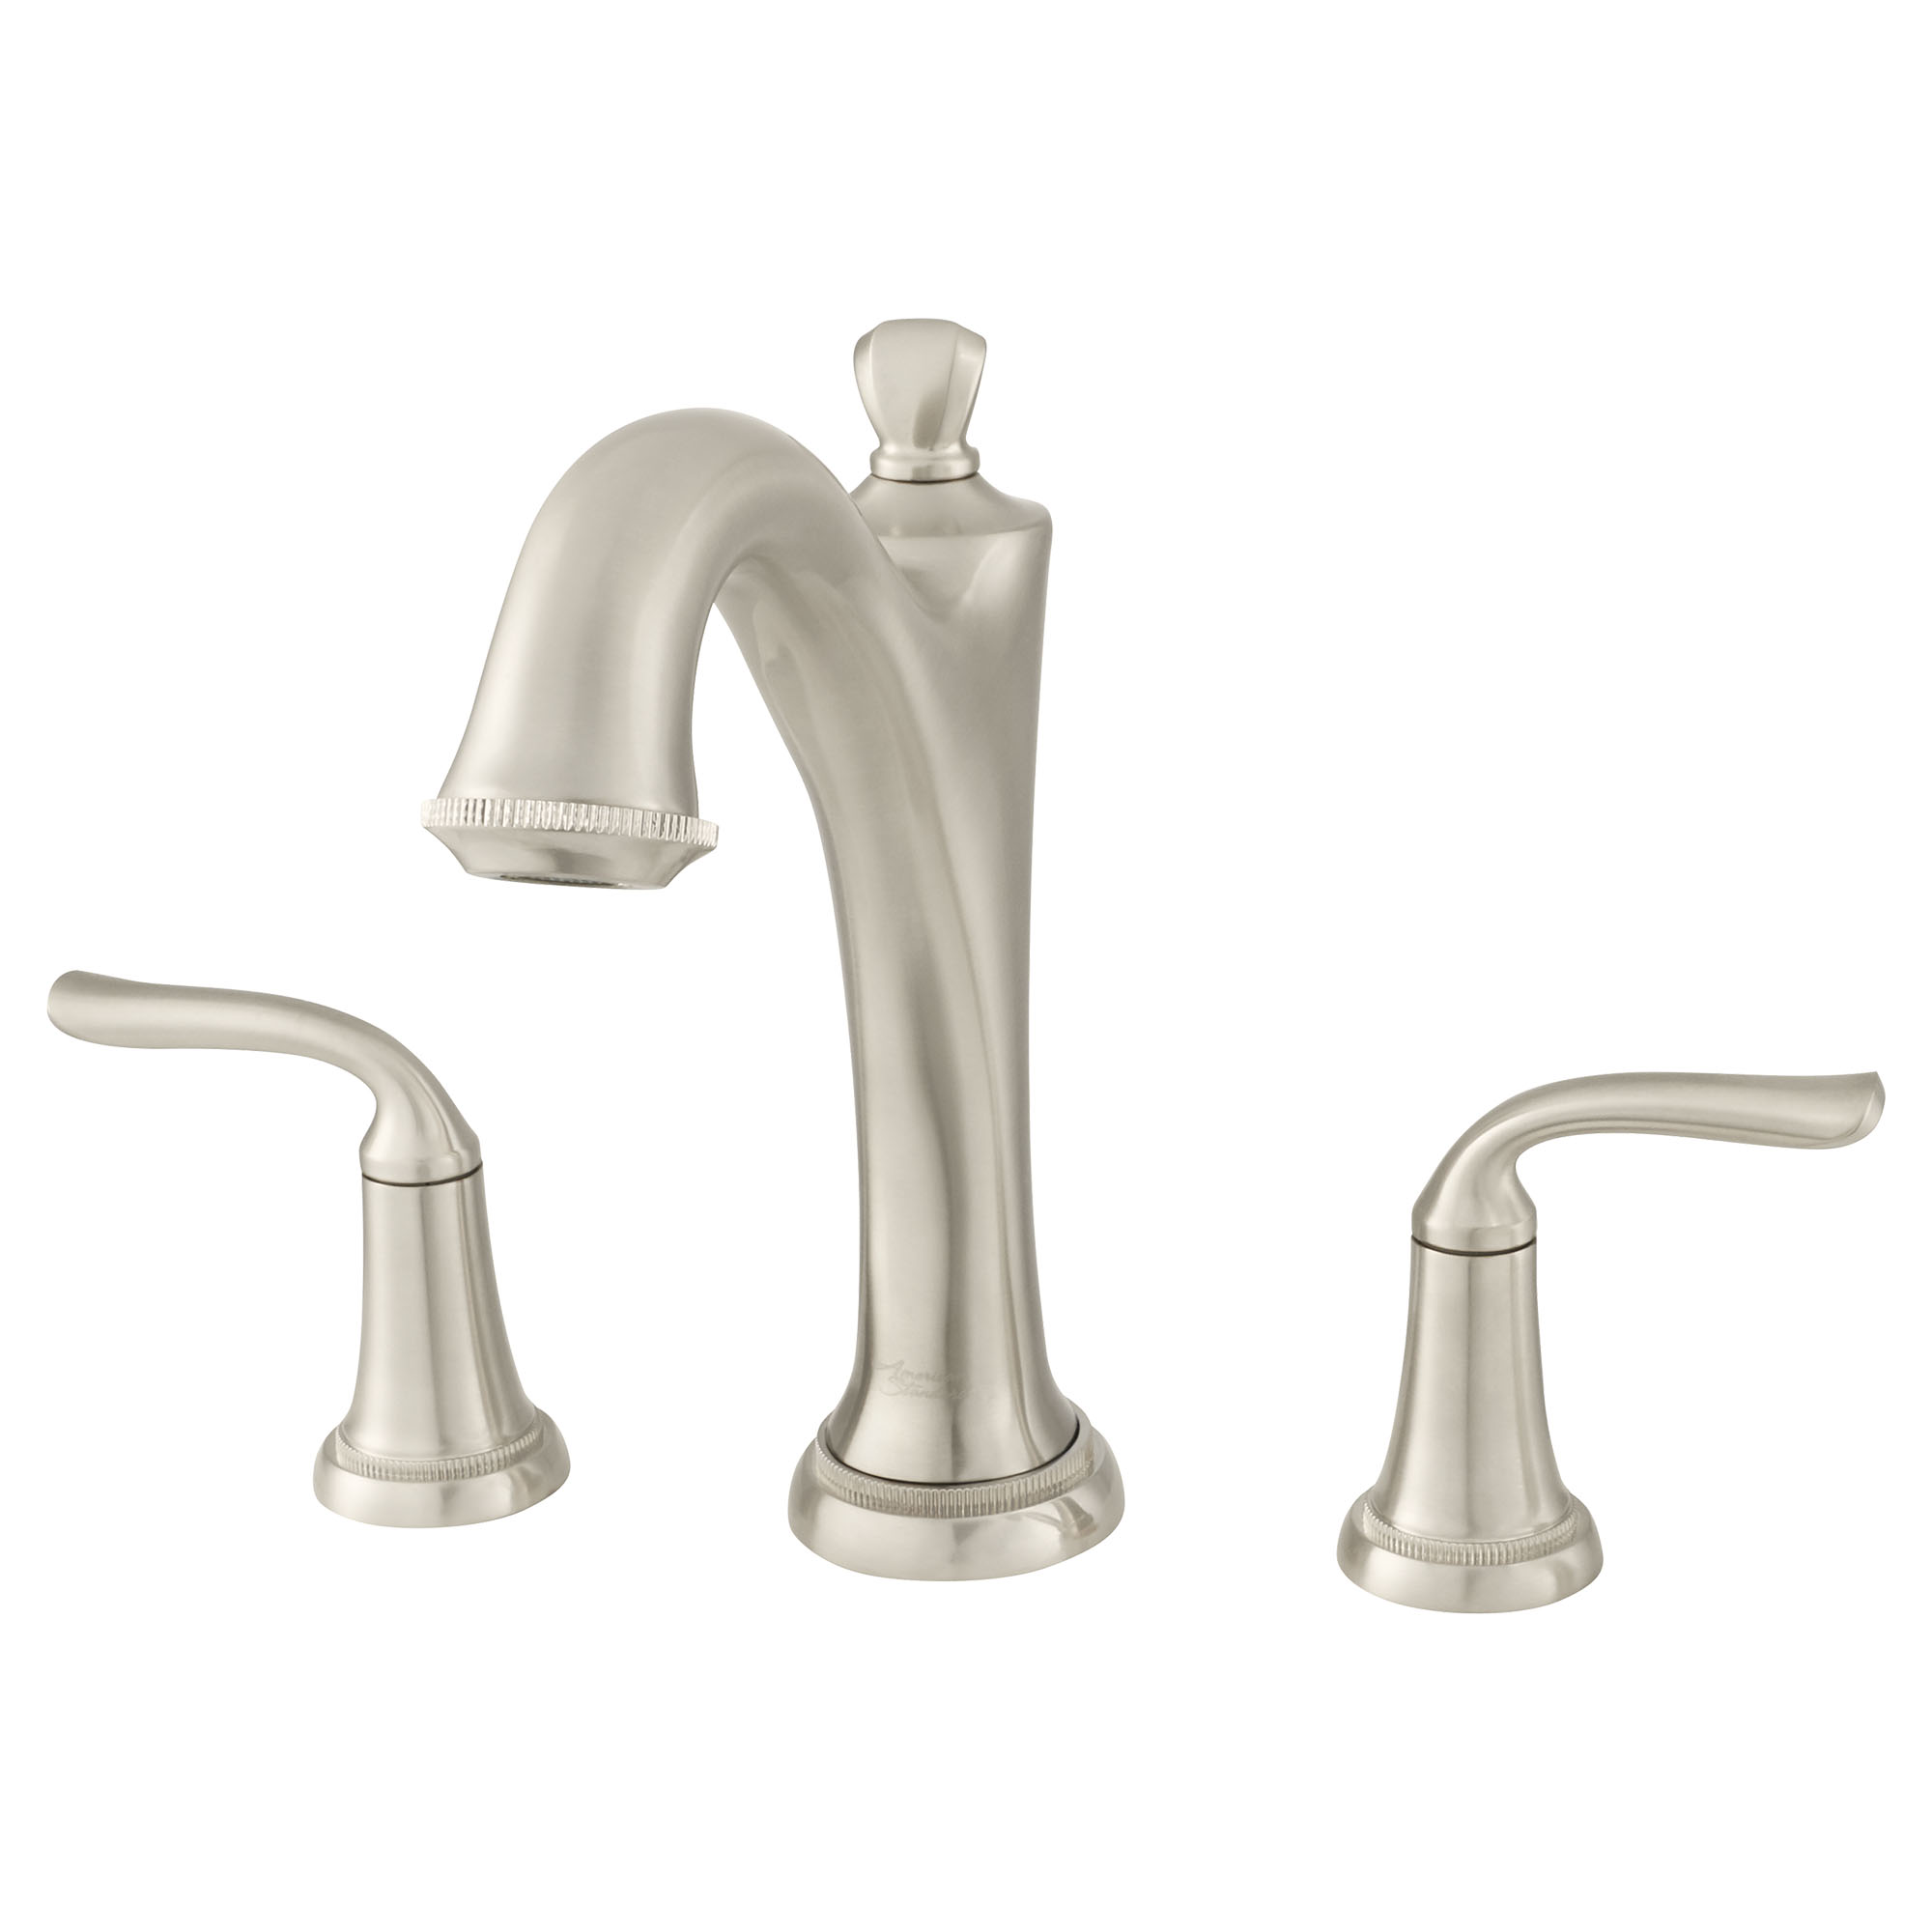 Patience Roman Tub Faucet with Hand Shower